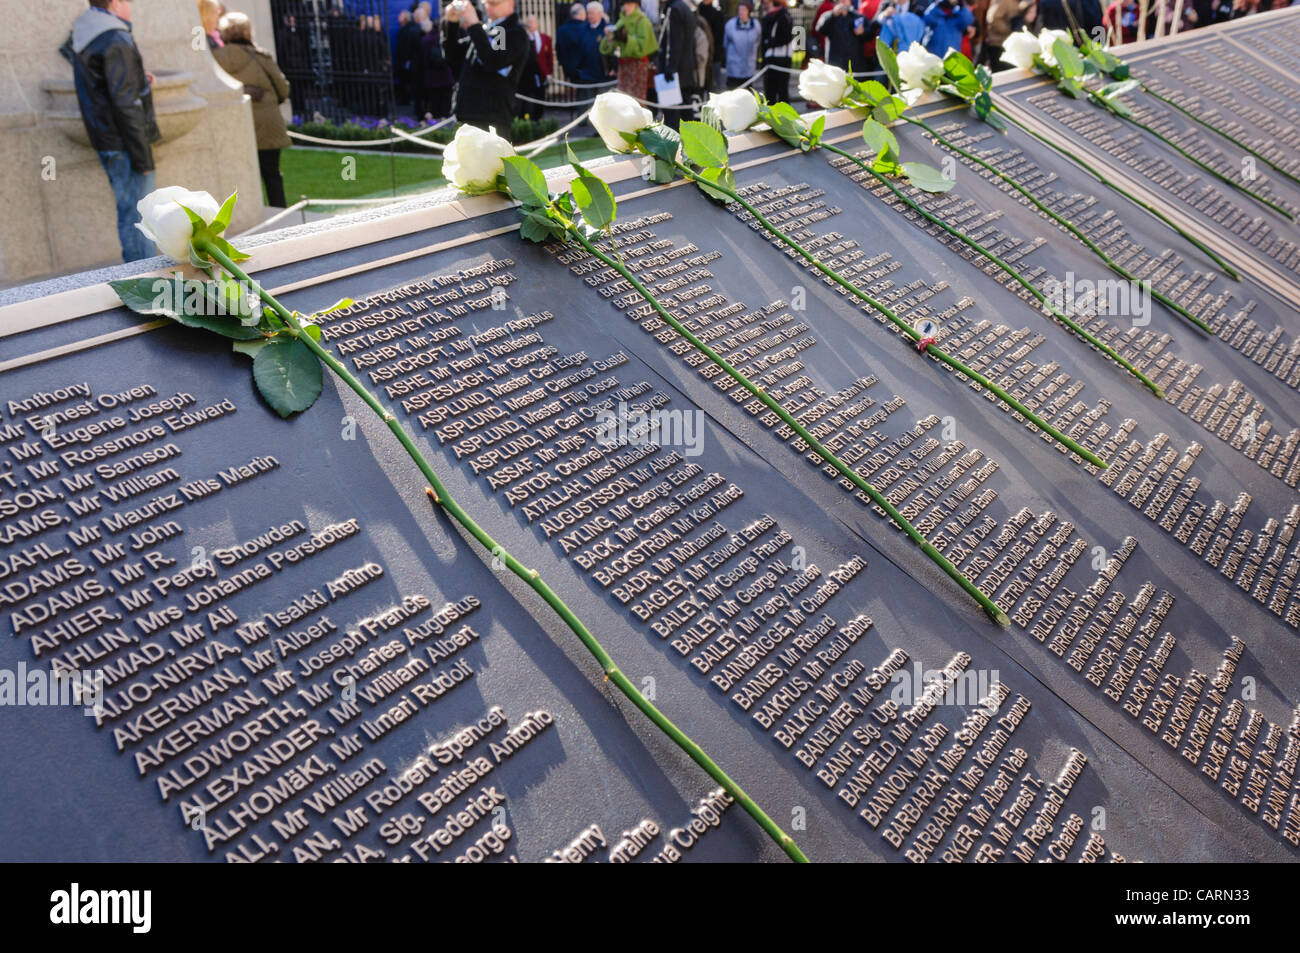 Belfast, UK. 15/04/2012 - Names of all victims at the centenary of the sinking of the Titanic, and opening of the Memorial Garden at Belfast City Hall. Stock Photo